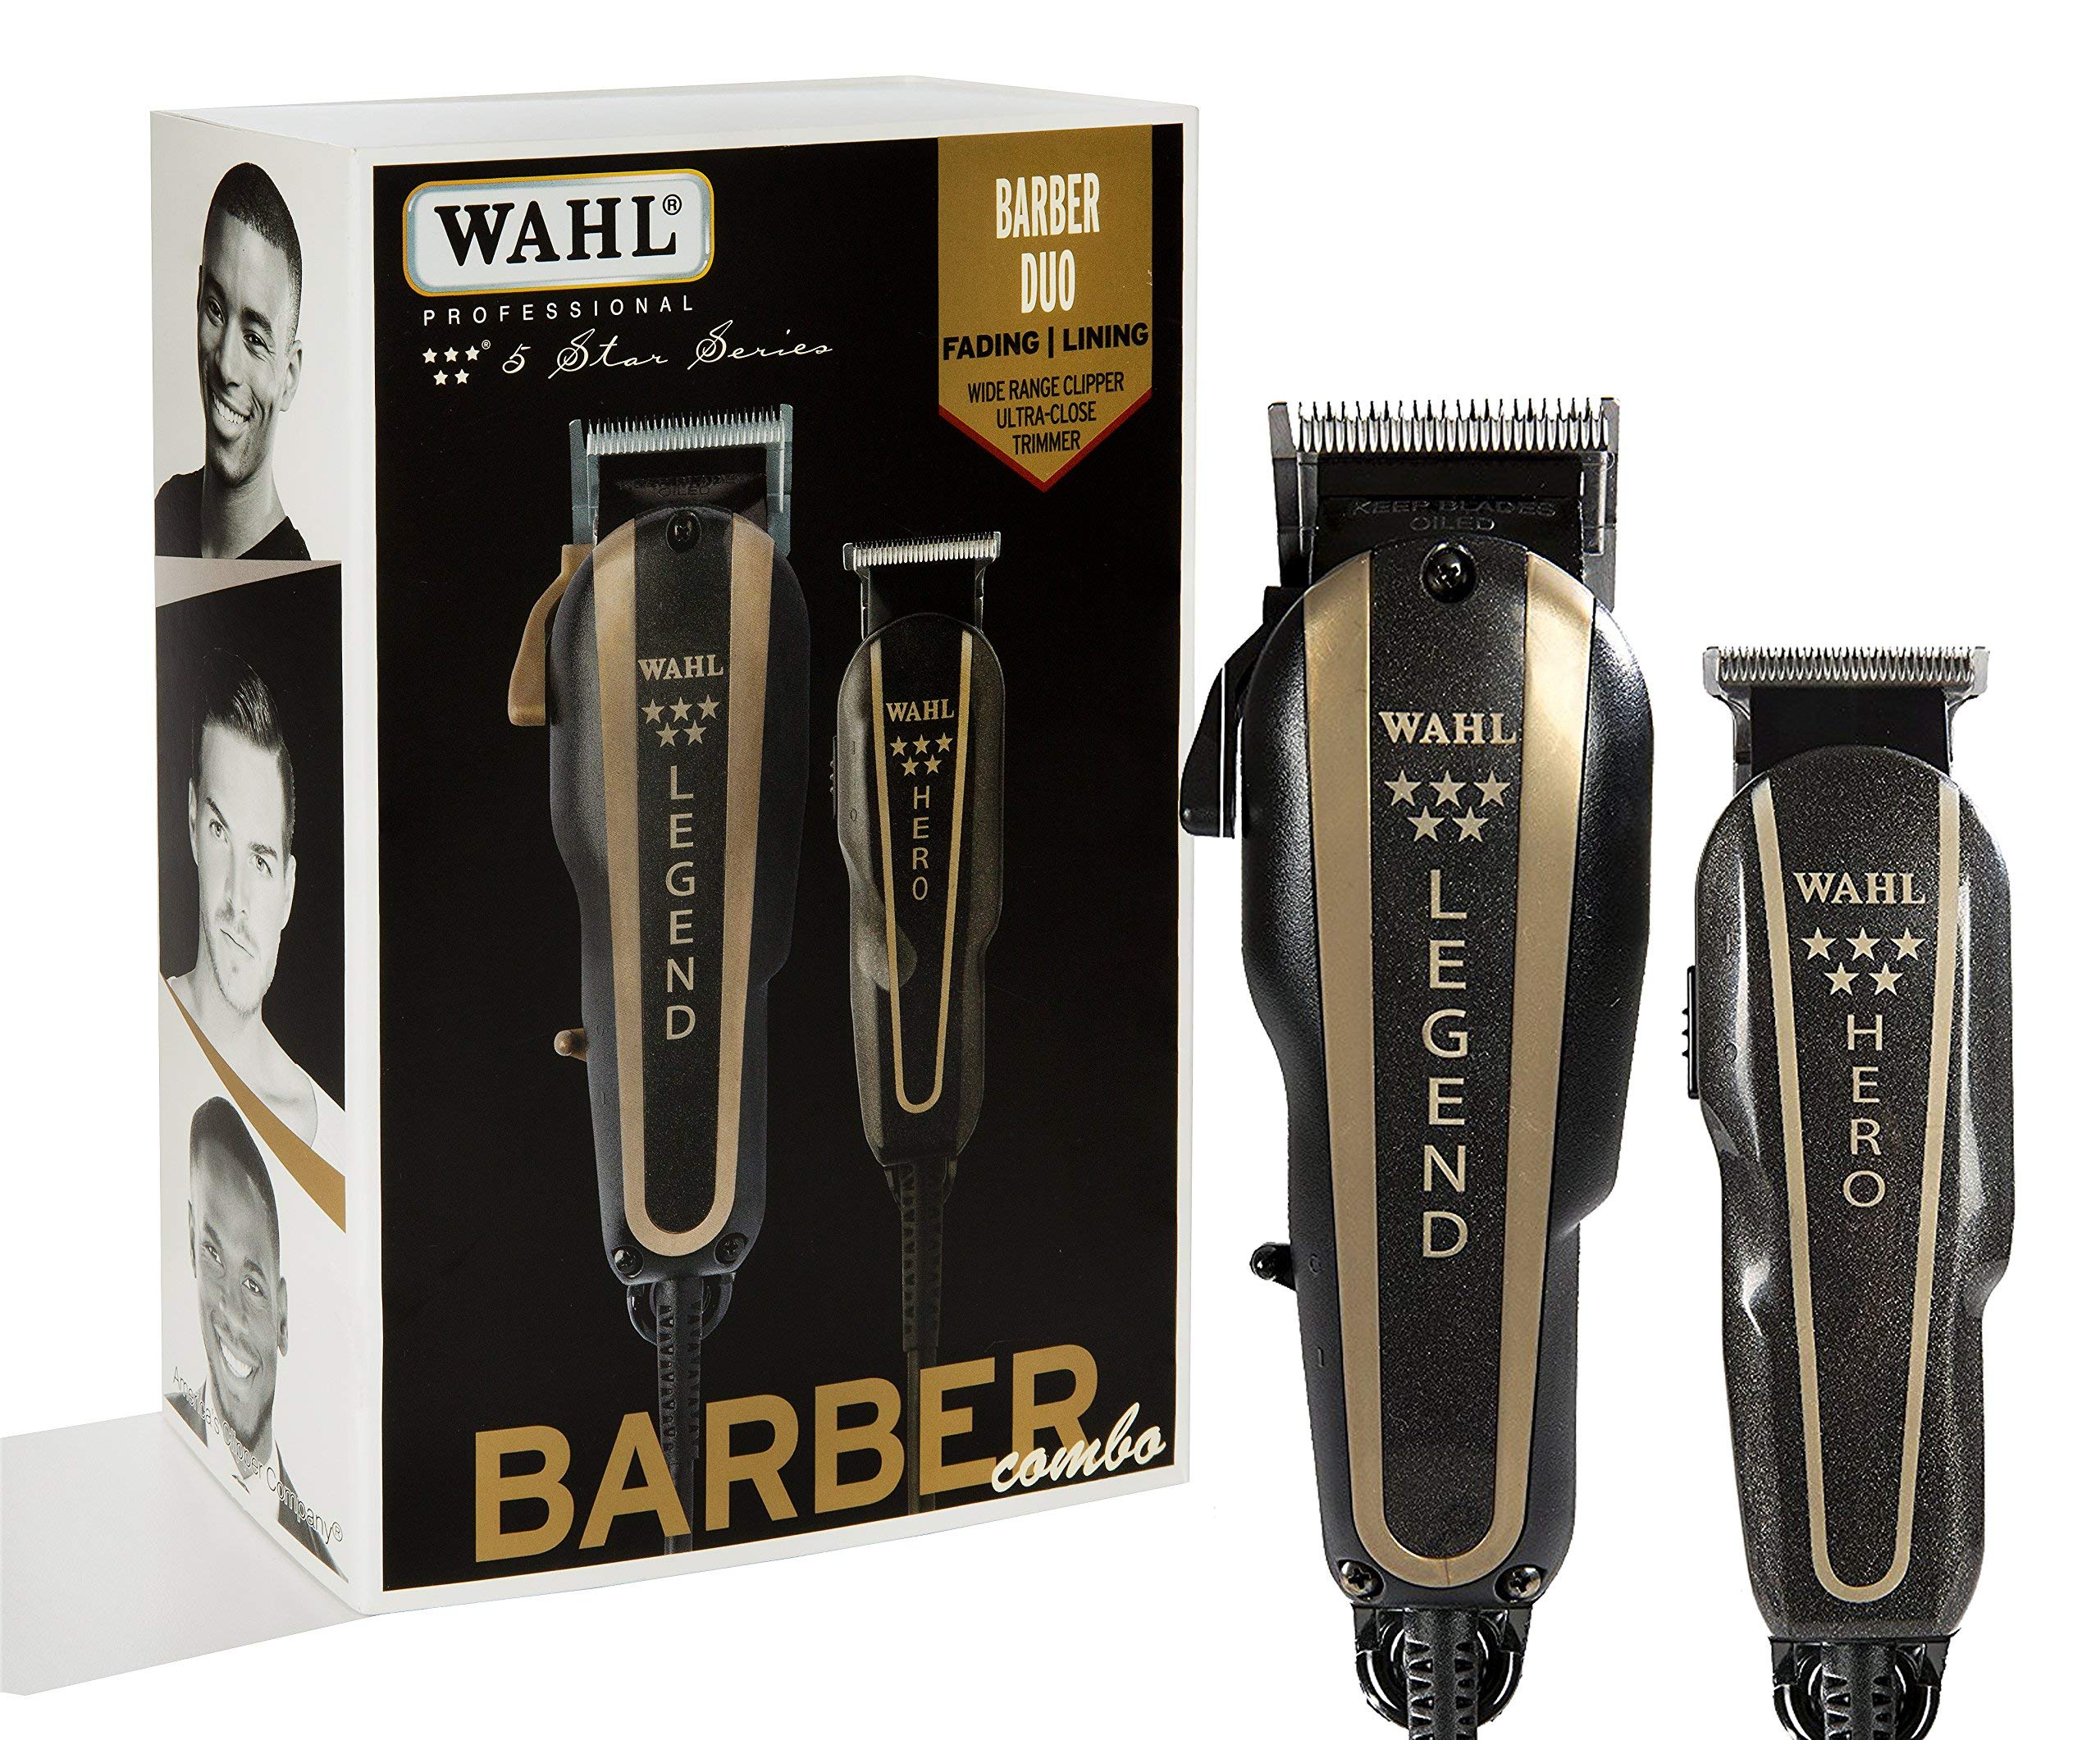 Wahl Professional 5-Star Barber Combo #8180 Features a New Look 5-Star Legend Clipper and Hero T-Blade Trimmer Powerful v9000 Motor Clipper and Rotary Motor Barber Trimmer